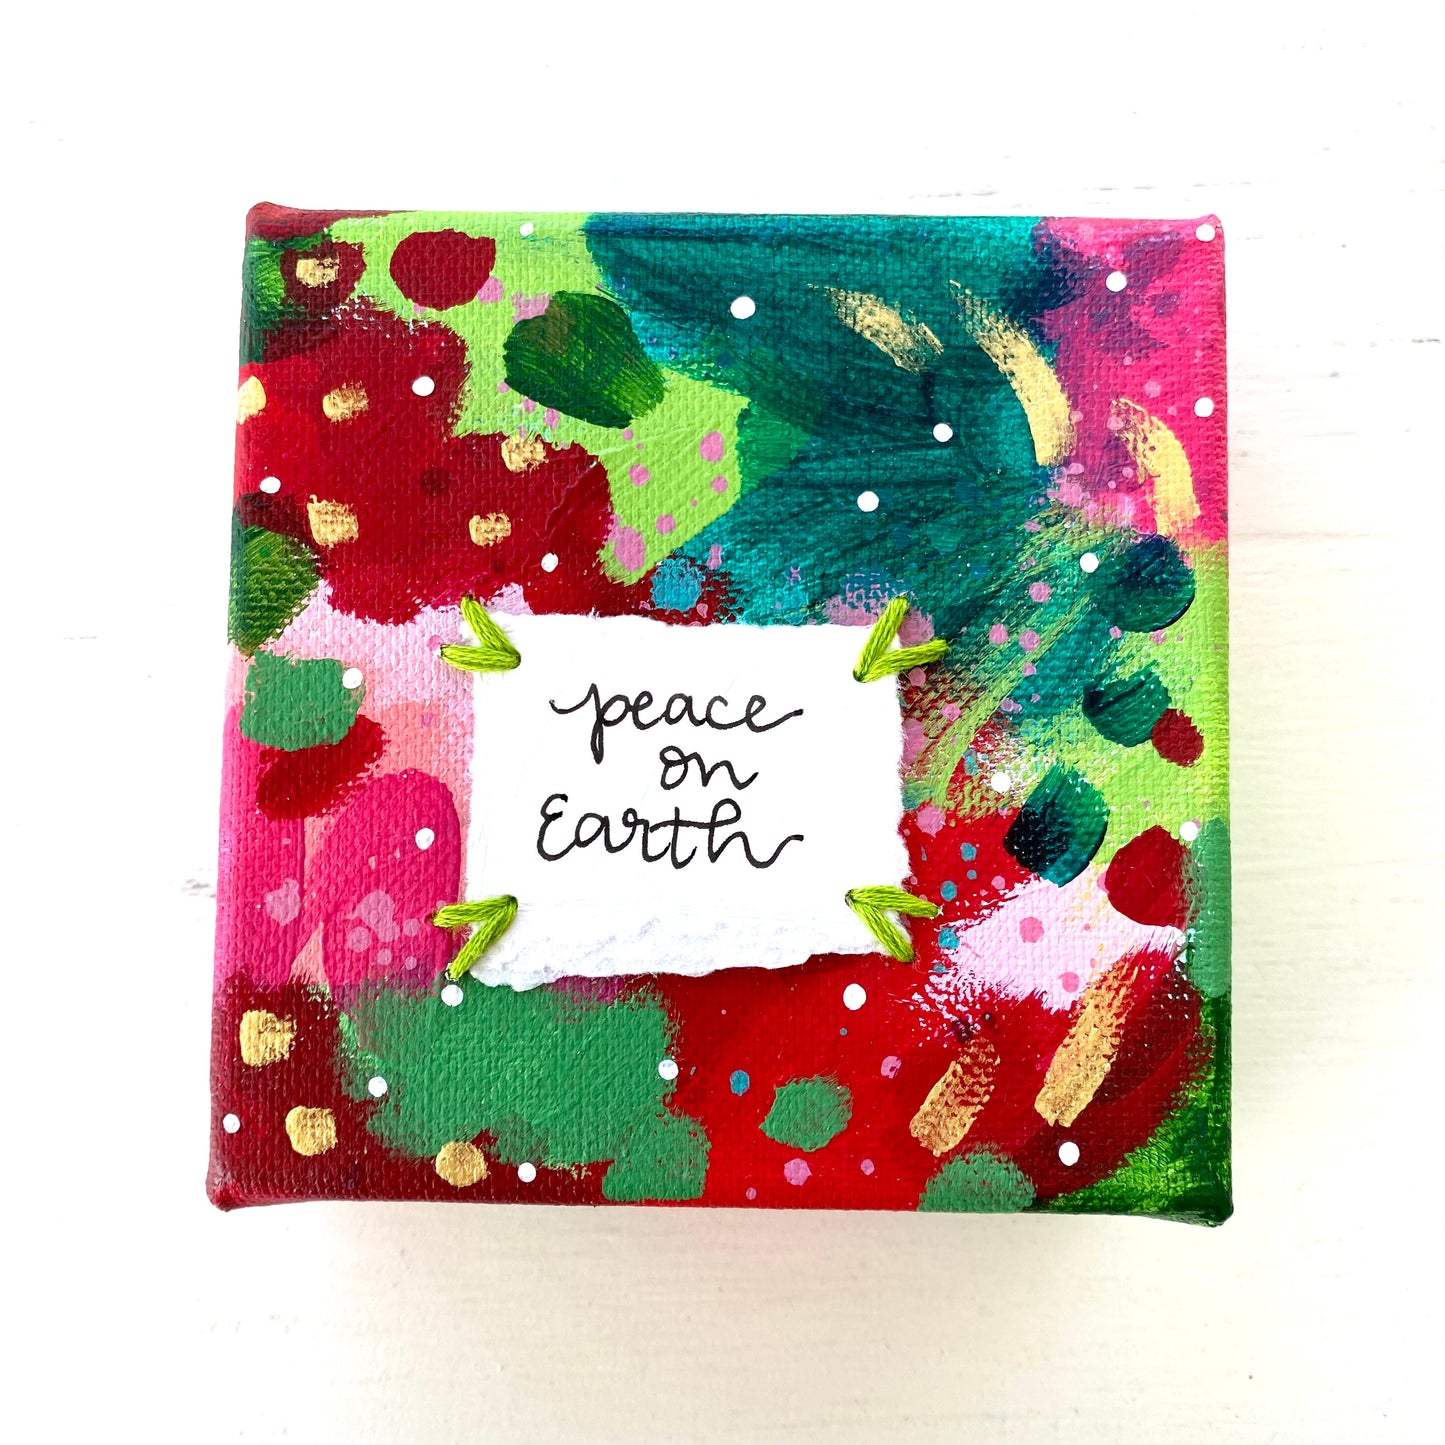 Peace on Earth-1 4x4 inch original abstract canvas with embroidery thread accents